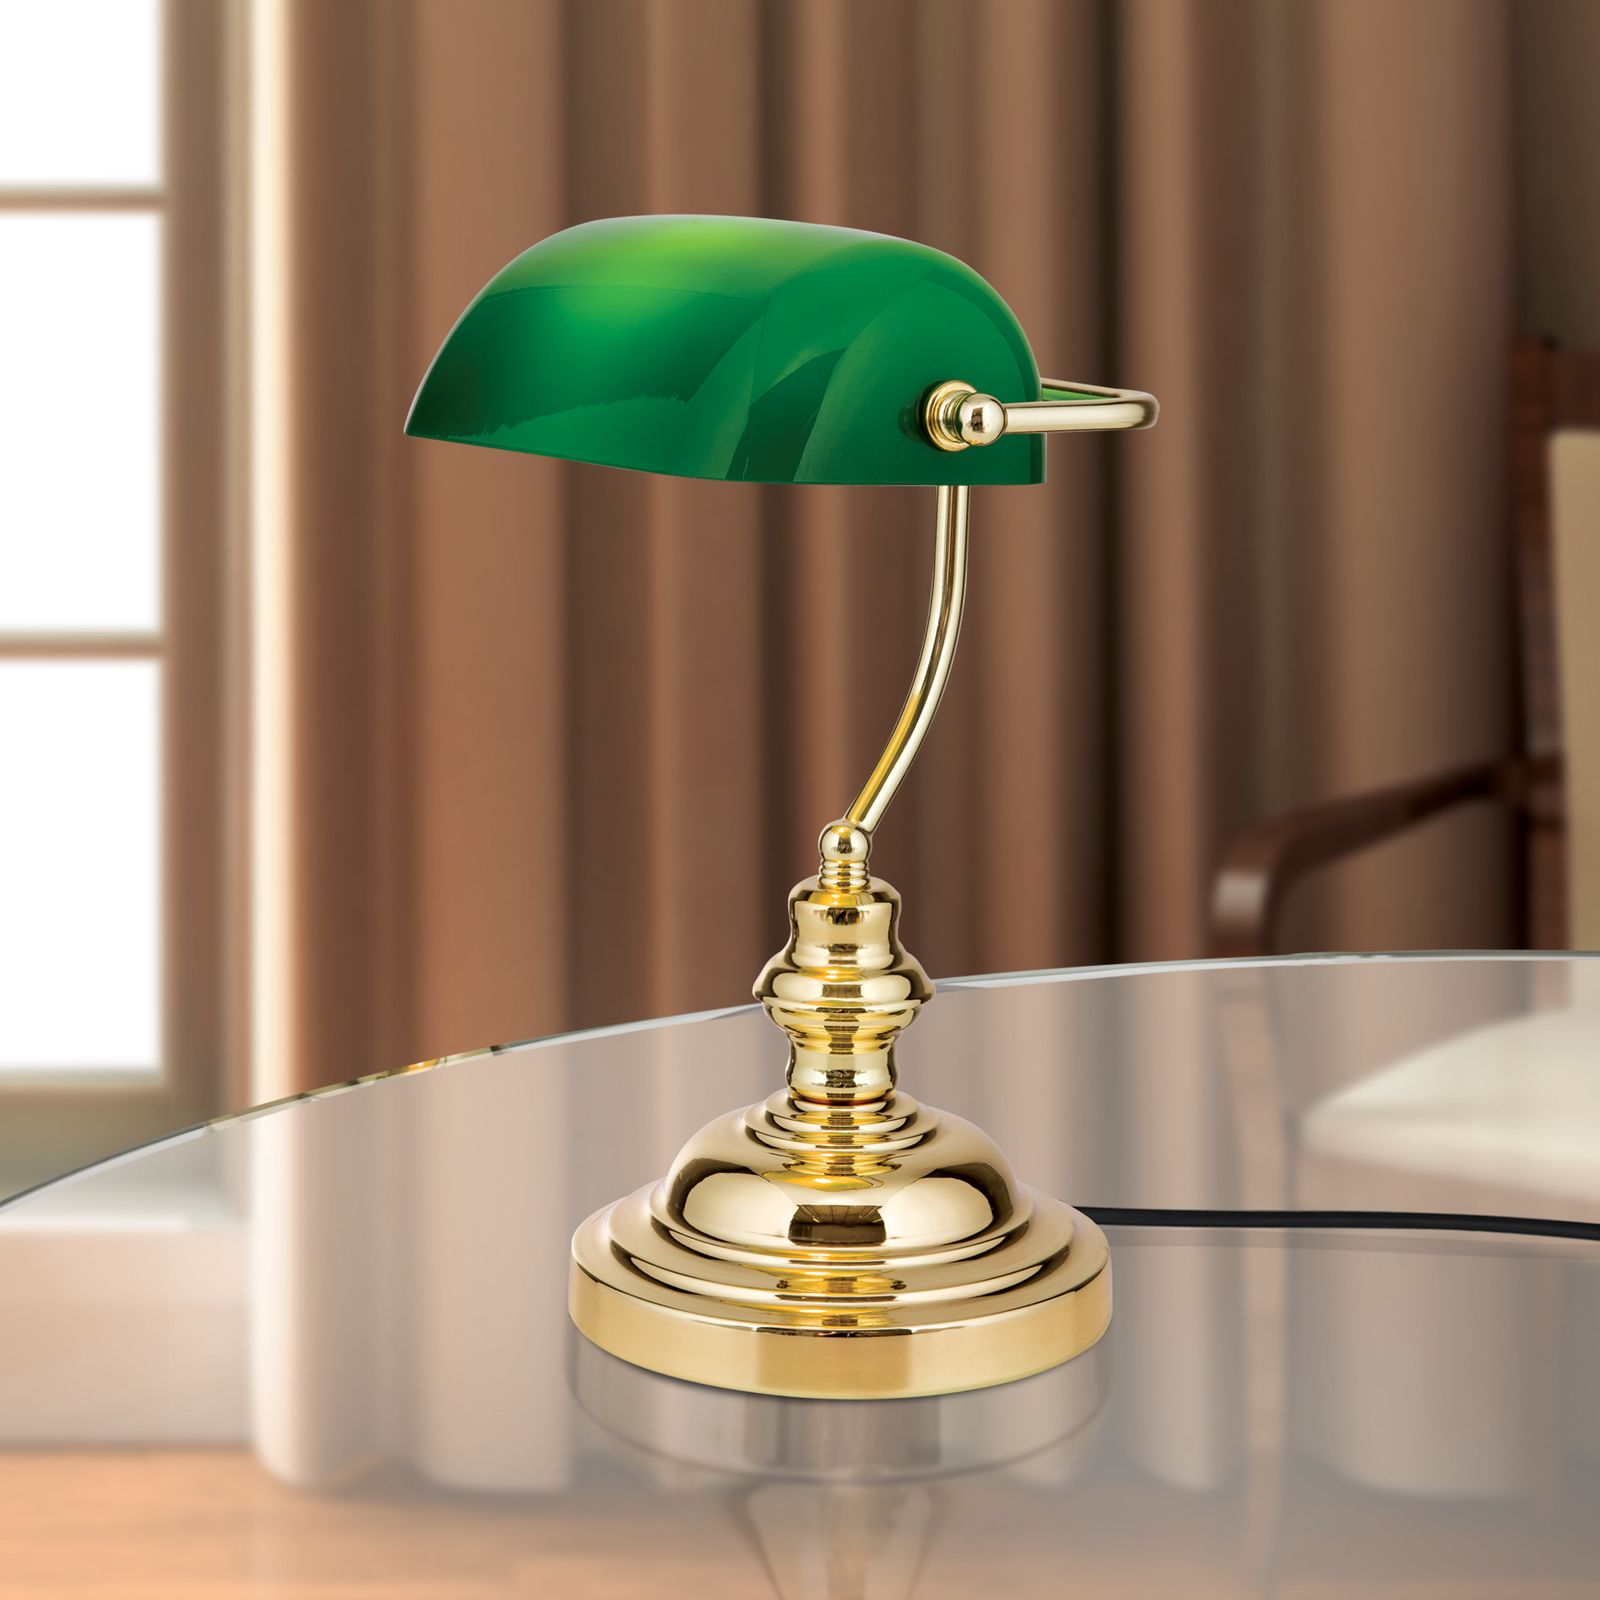 Bankers Lamp, Shiny Brass finish & green glass shade